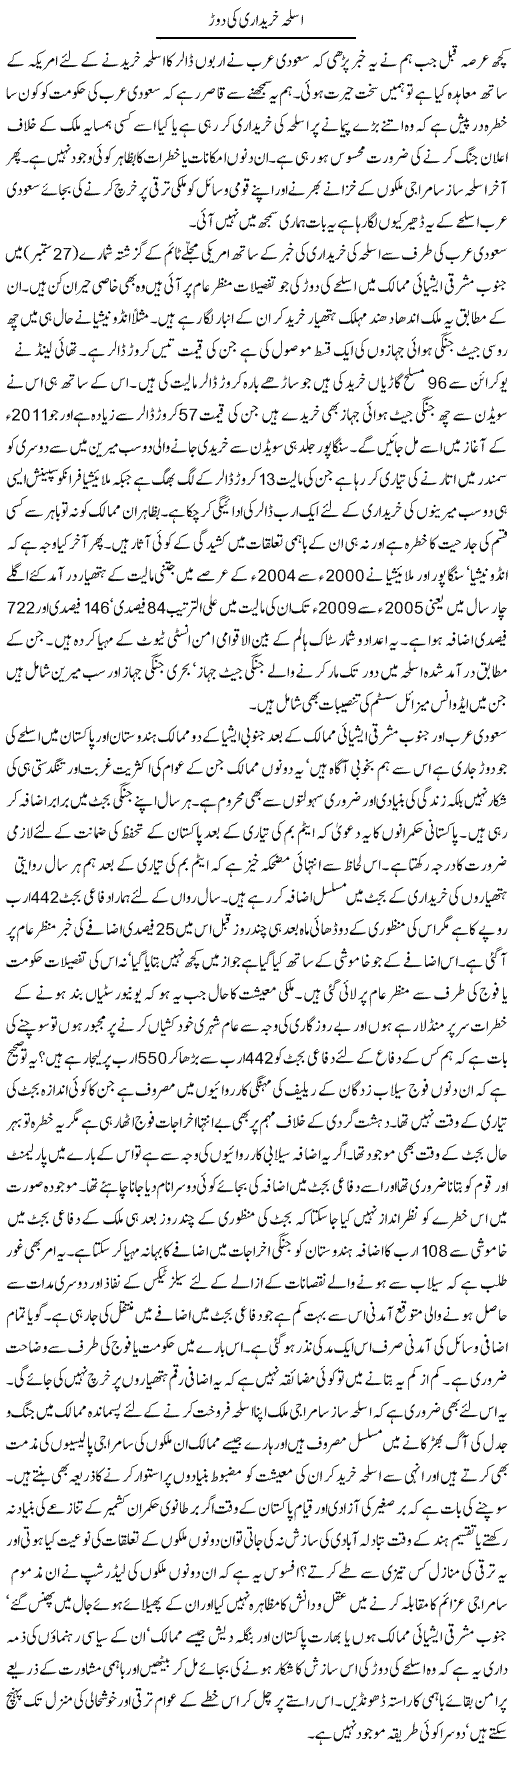 Buying Weapons Express Column Hameed Akhtar 28 September 2010